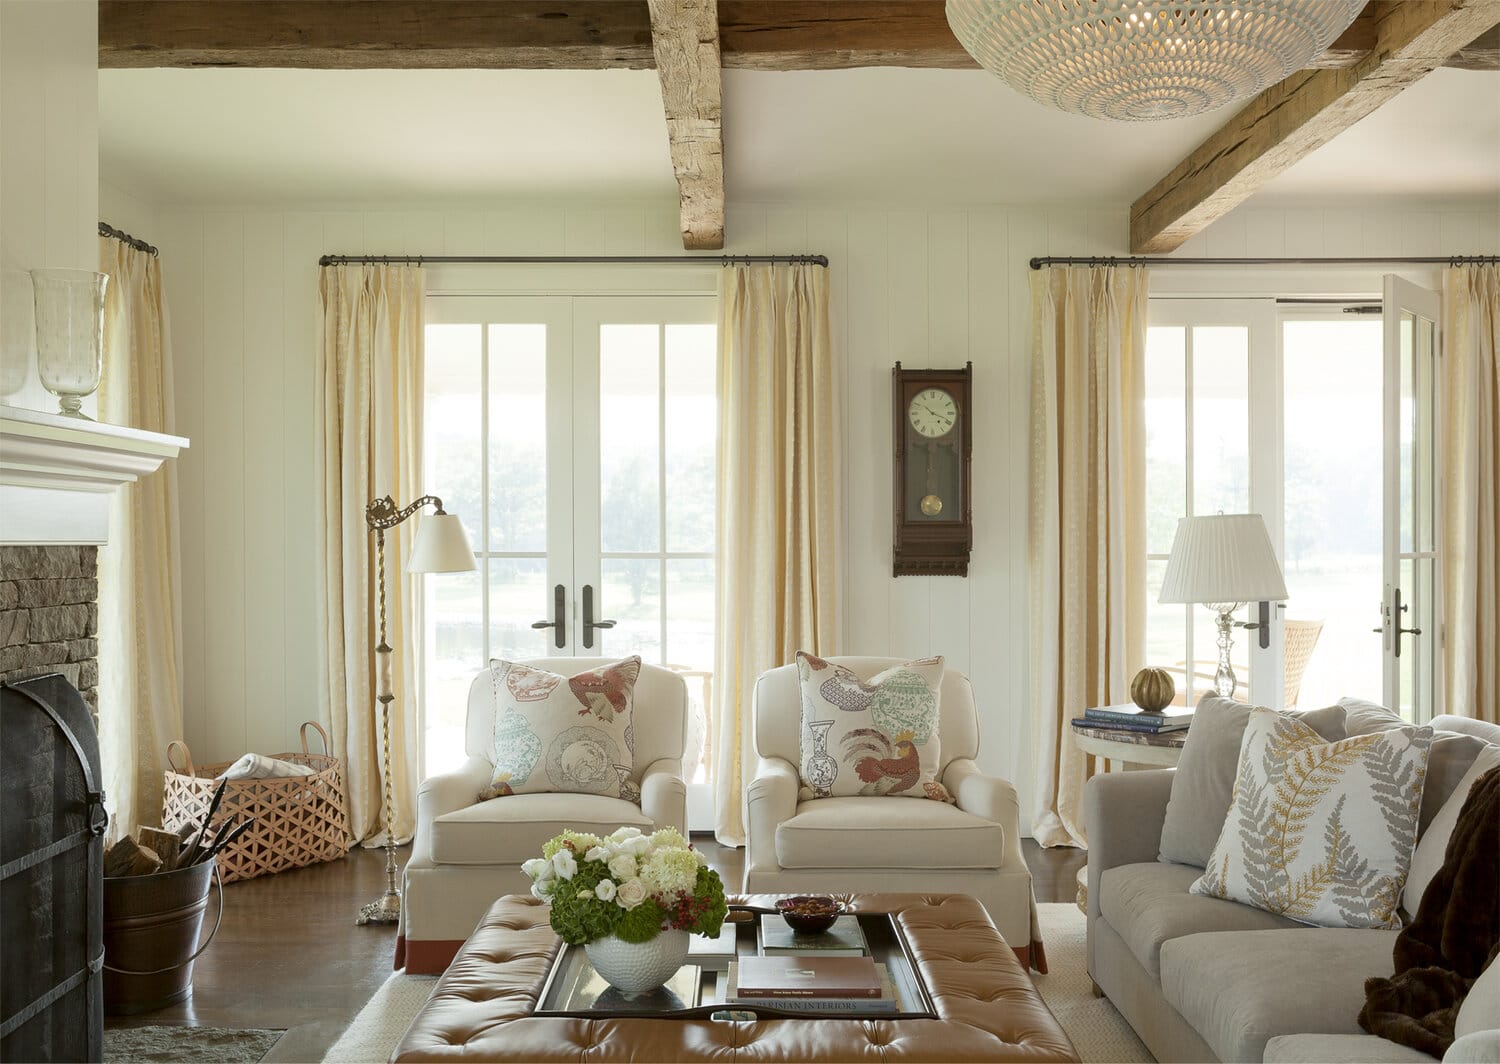 Emily Gilbert PhotographyA lovely, eclectic farmhouse by A-List Interiors' Anelle Gandelman is the perfect rustic yet elegant spot, where the timeless charm of a classic farmhouse meets the sophisticated creativity of modern design.